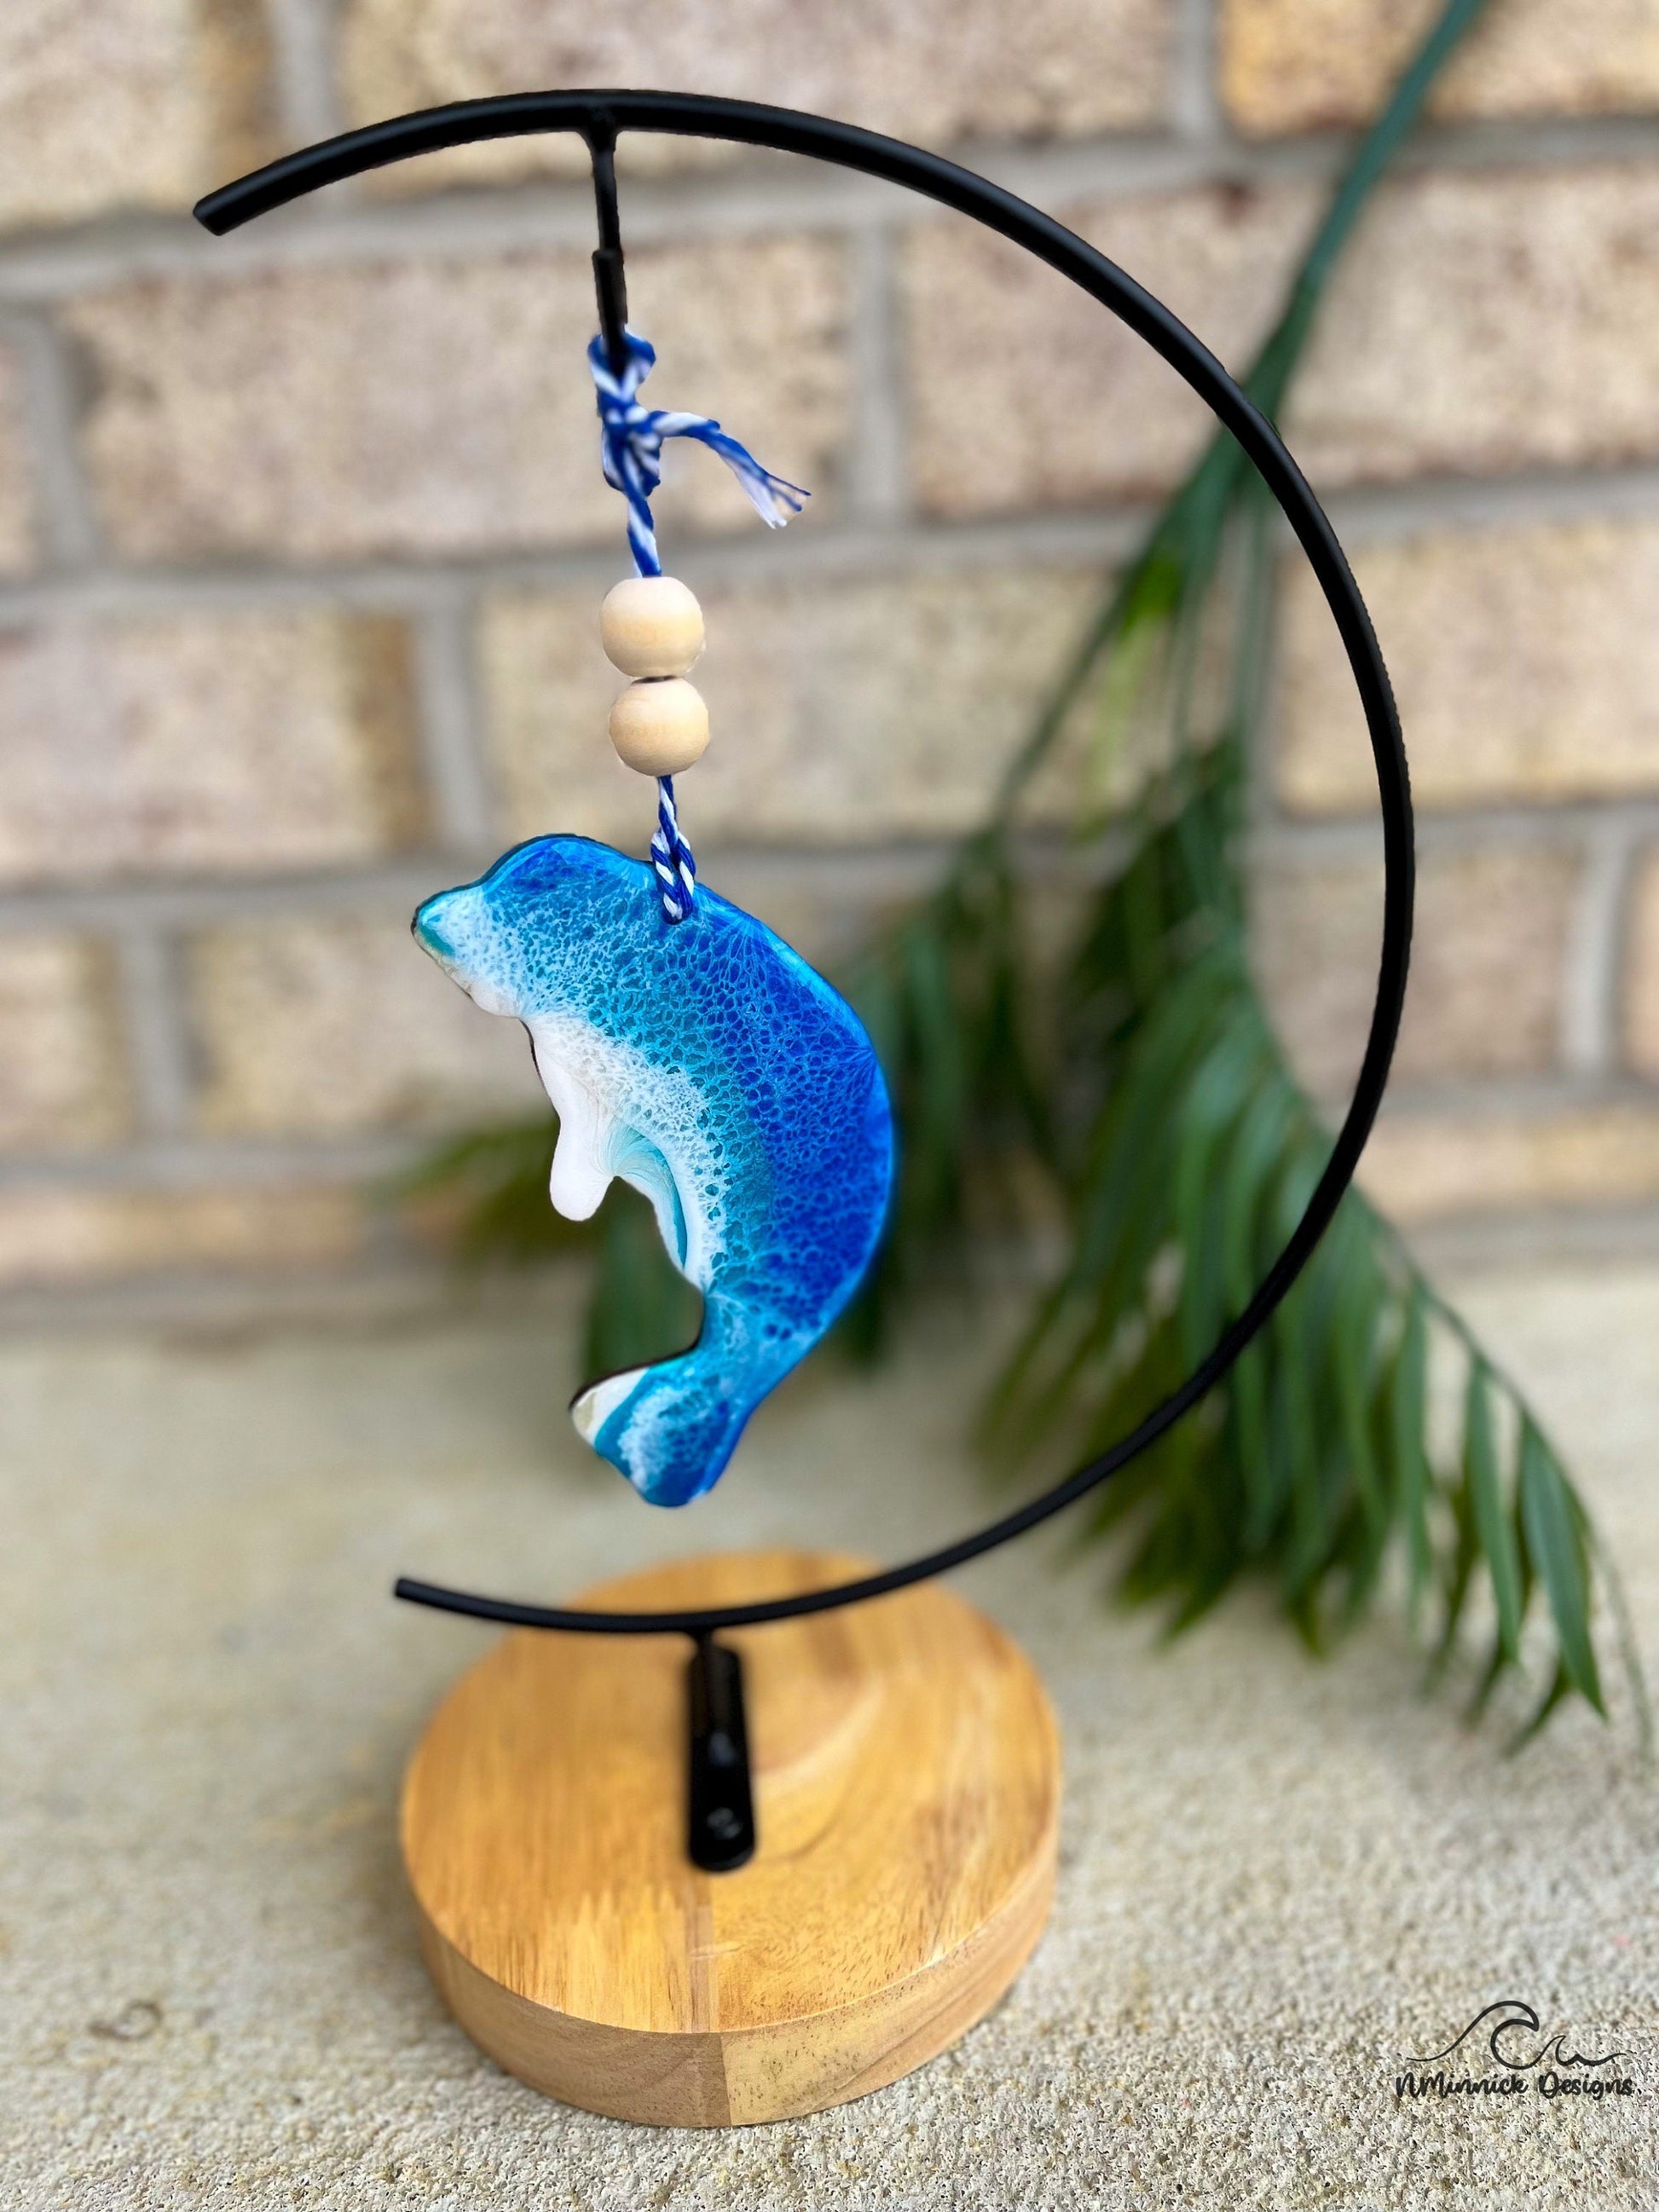 Manatee shaped ocean resin ornament with two wooden beads and hanging from an ornament stand.